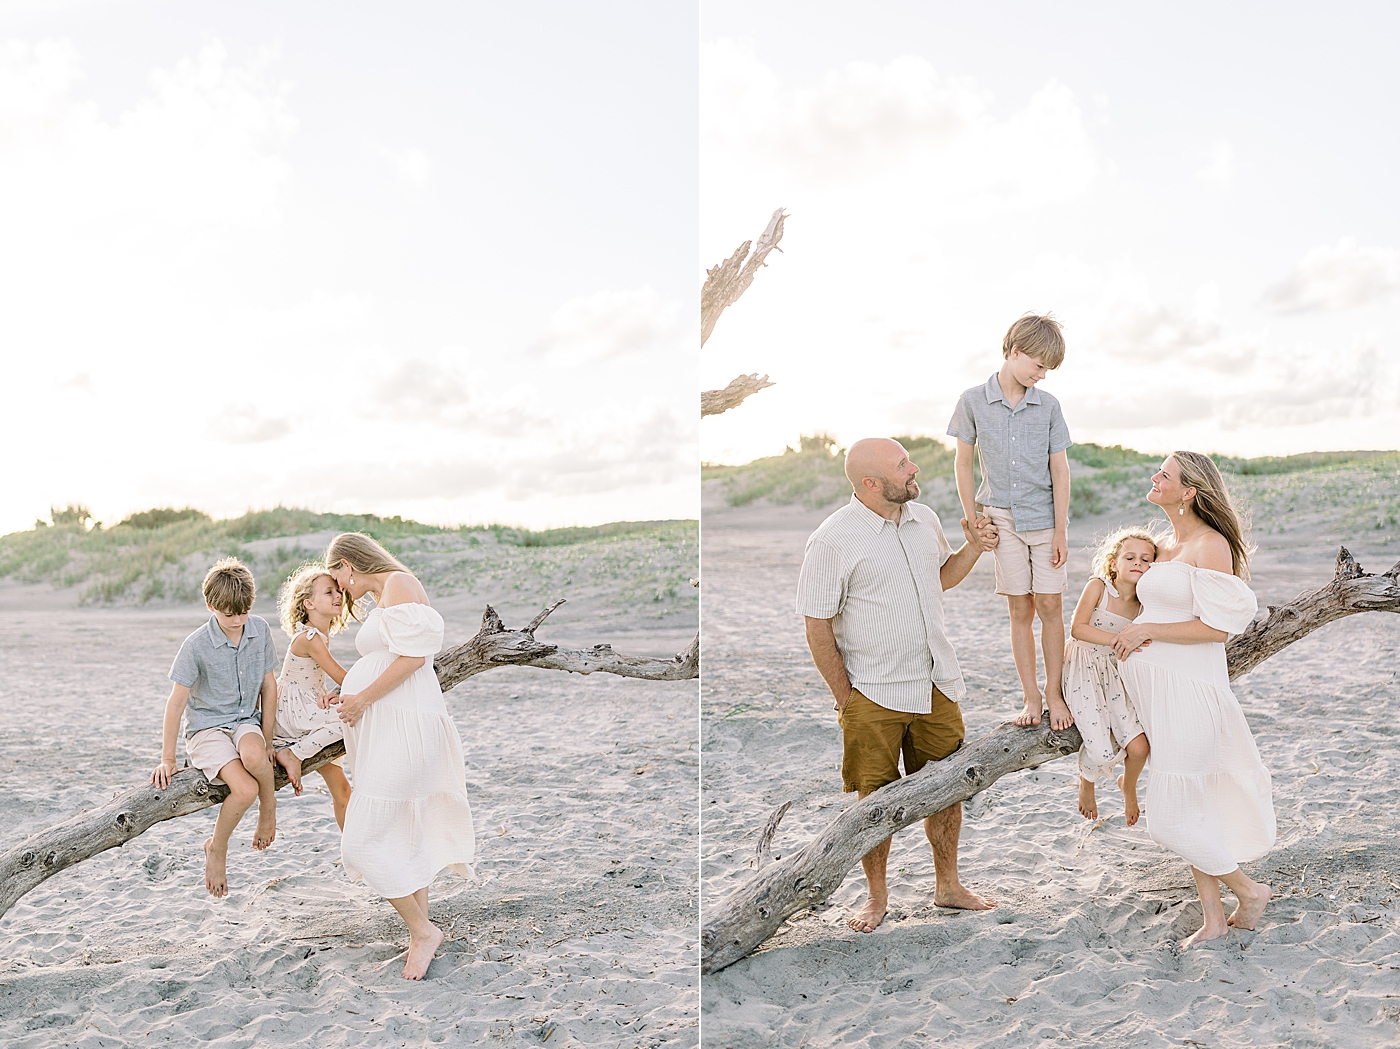 Family of four interacting on a fallen tree at Folly beach | Image by Caitlyn Motycka